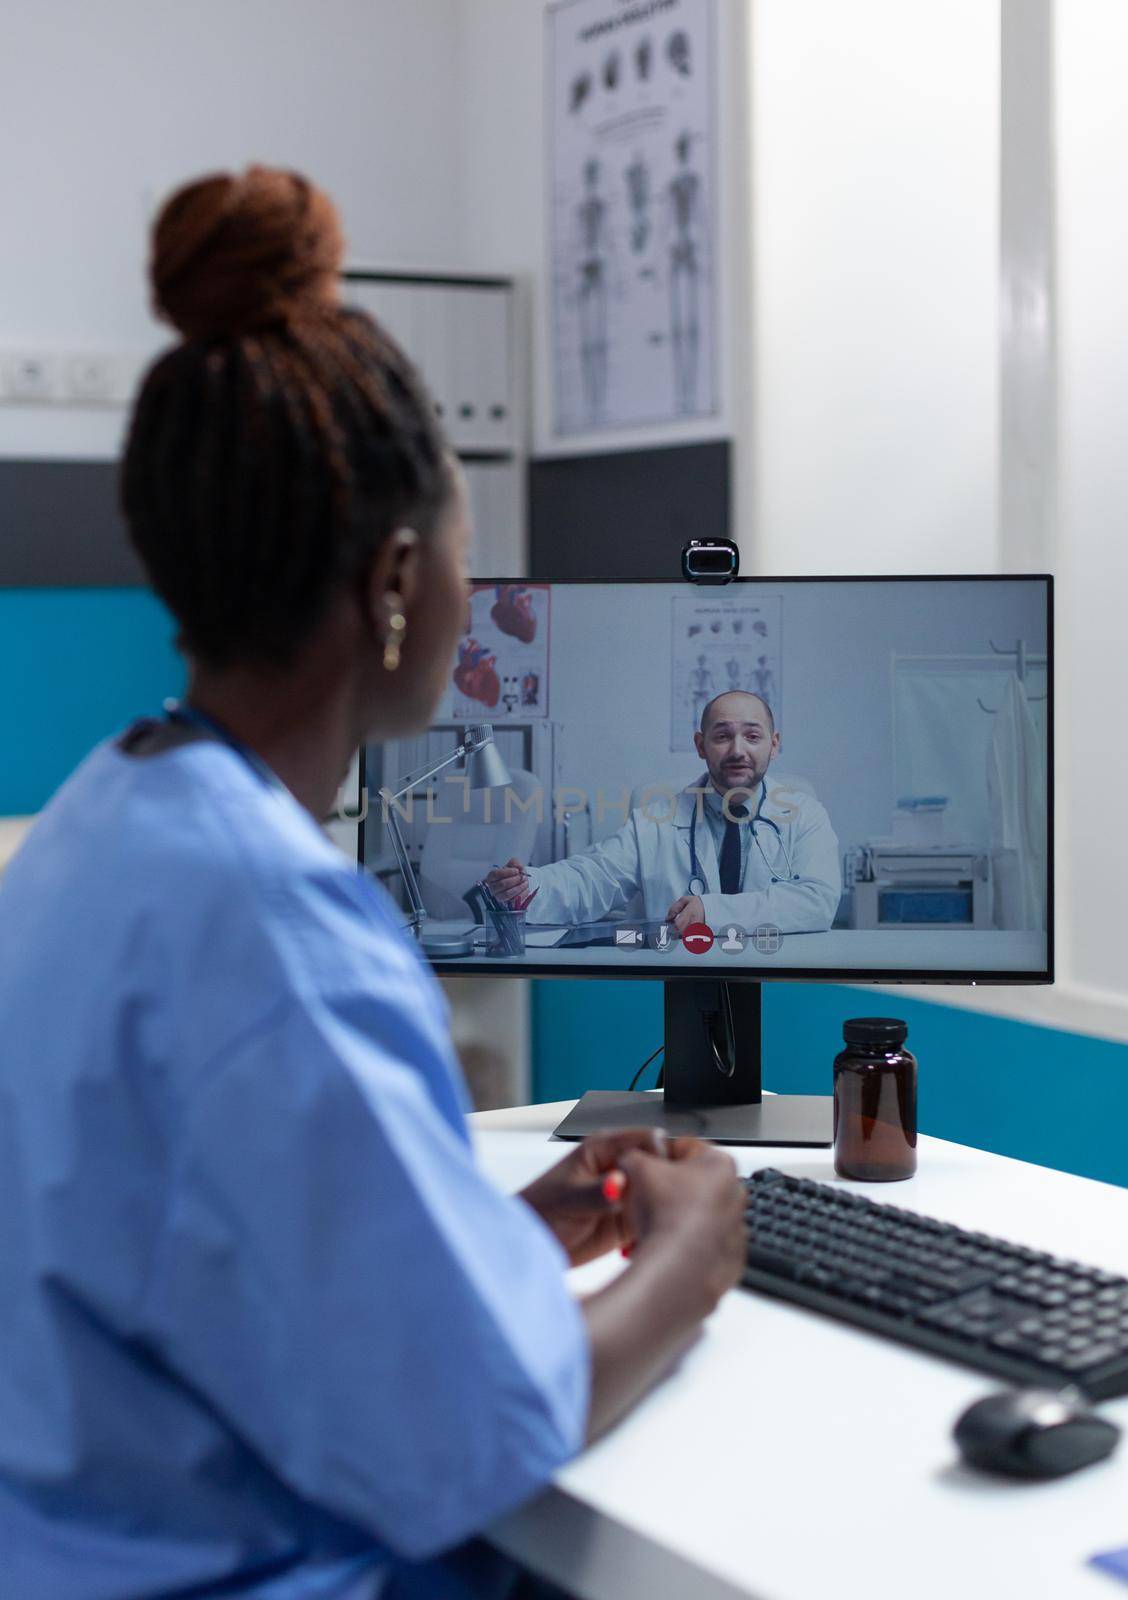 African american asisstant explaining surgery symptoms to remote doctor waiting for advice during online videocall meeting conference working in hospital office. Telemedicine call on computer screen